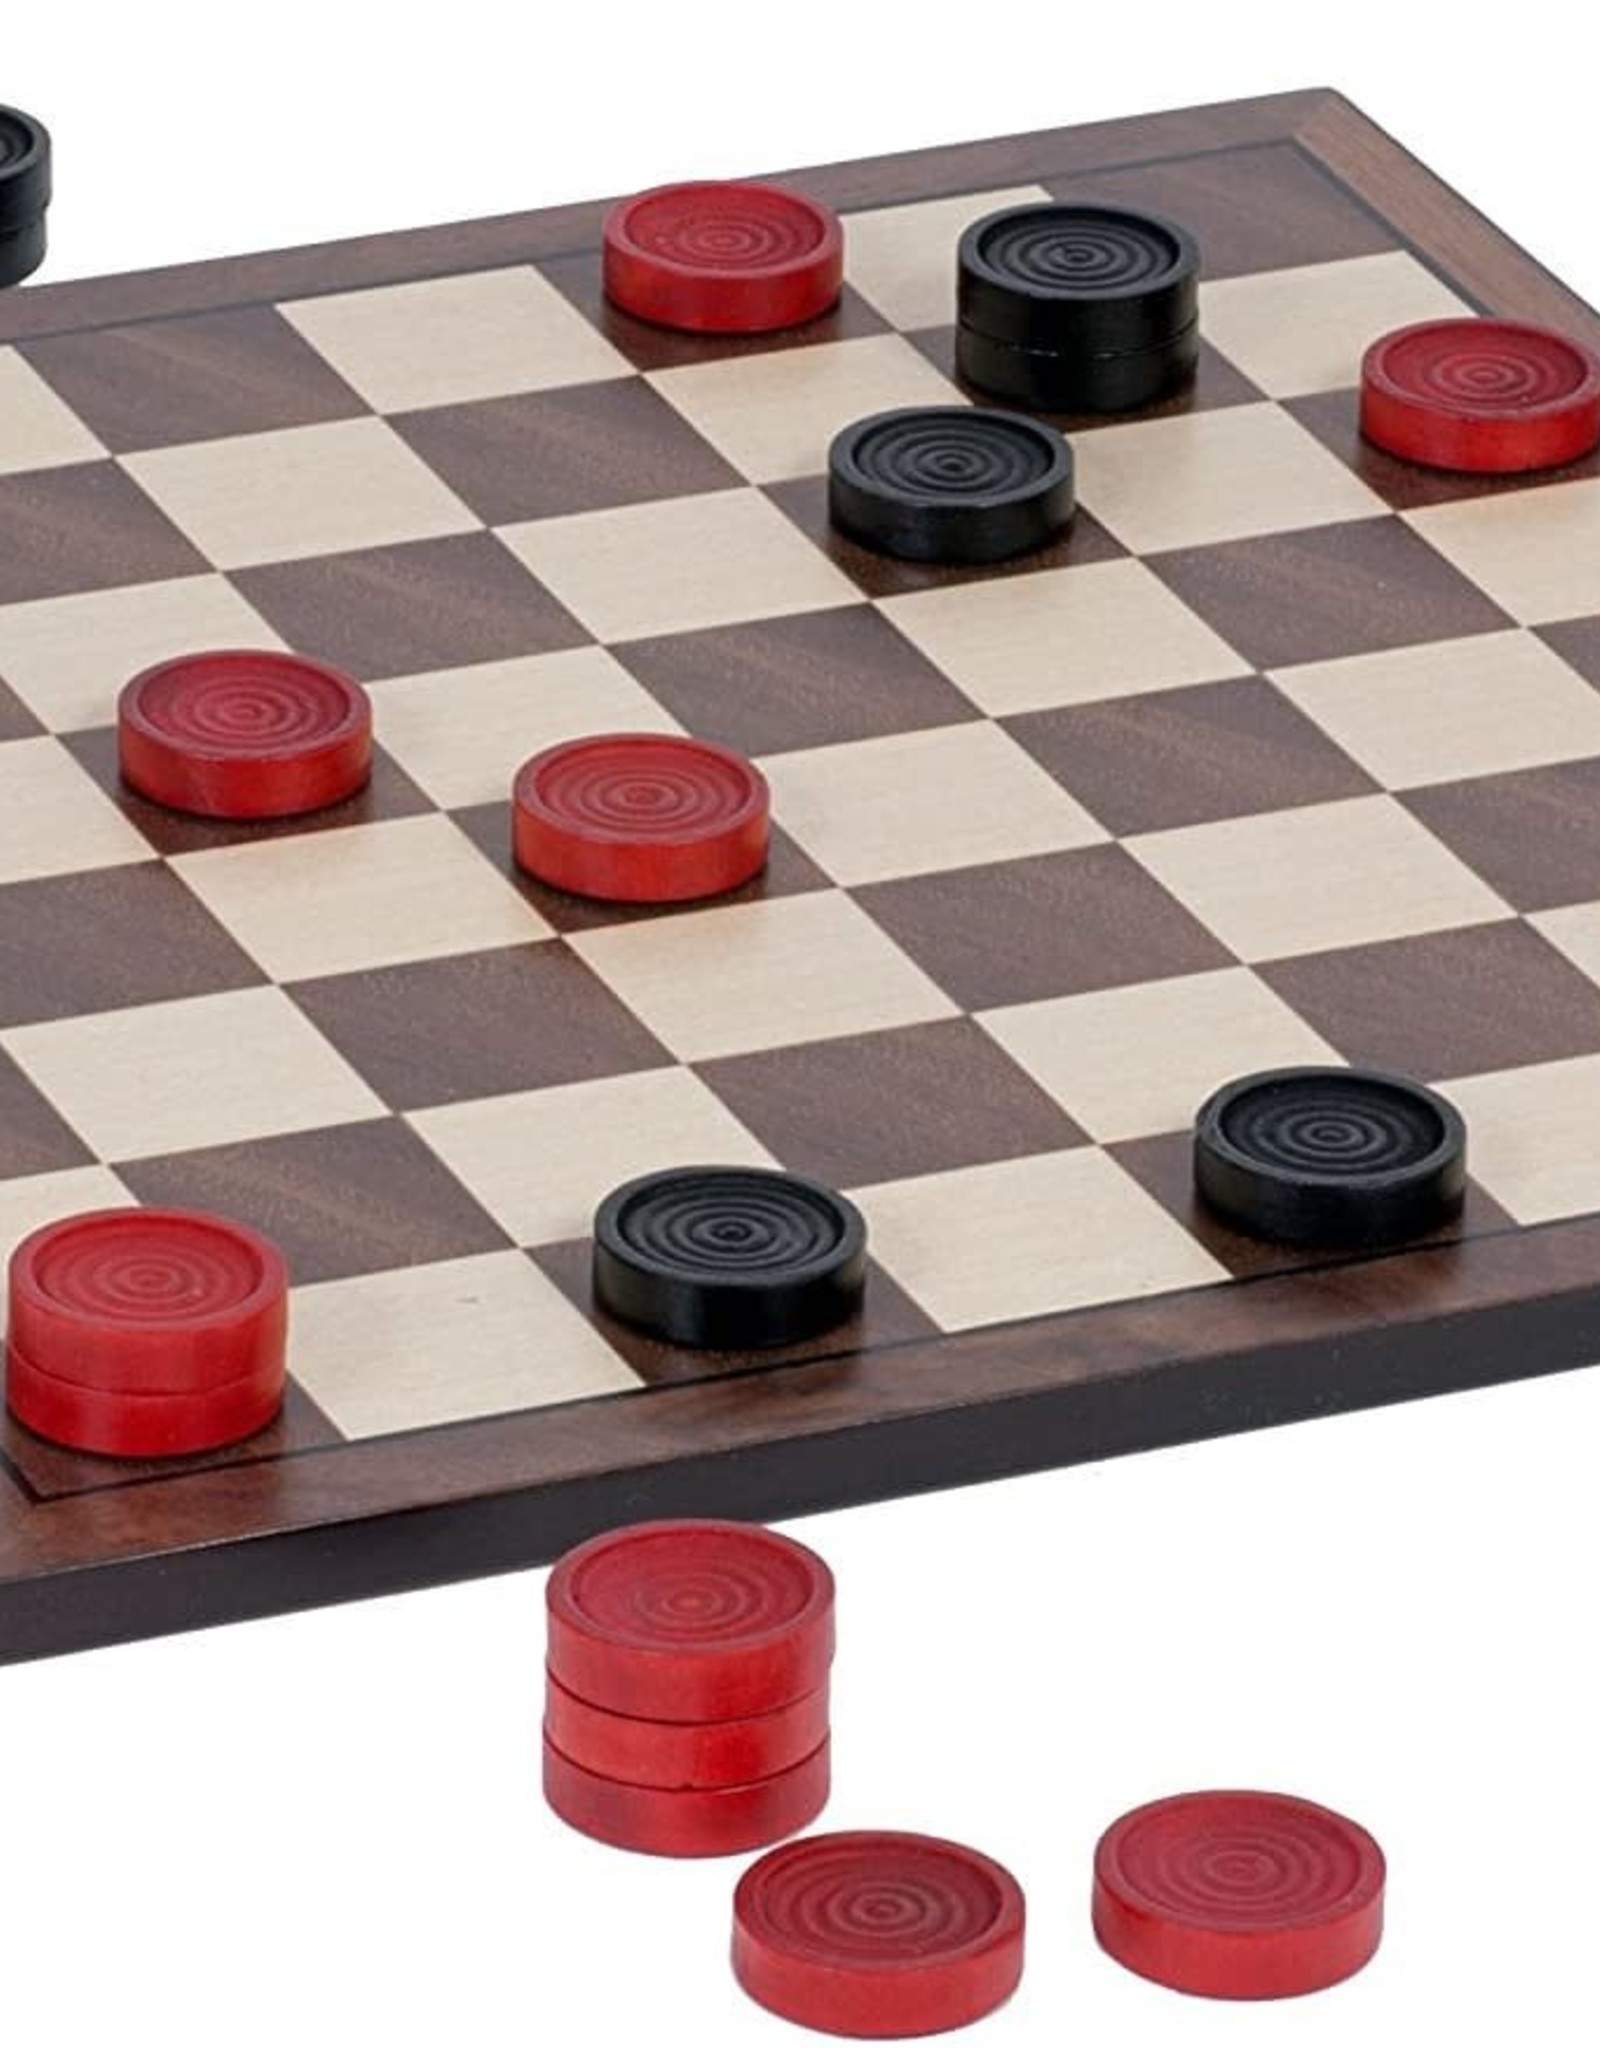 Checkers Set: Black and Red Wooden Board